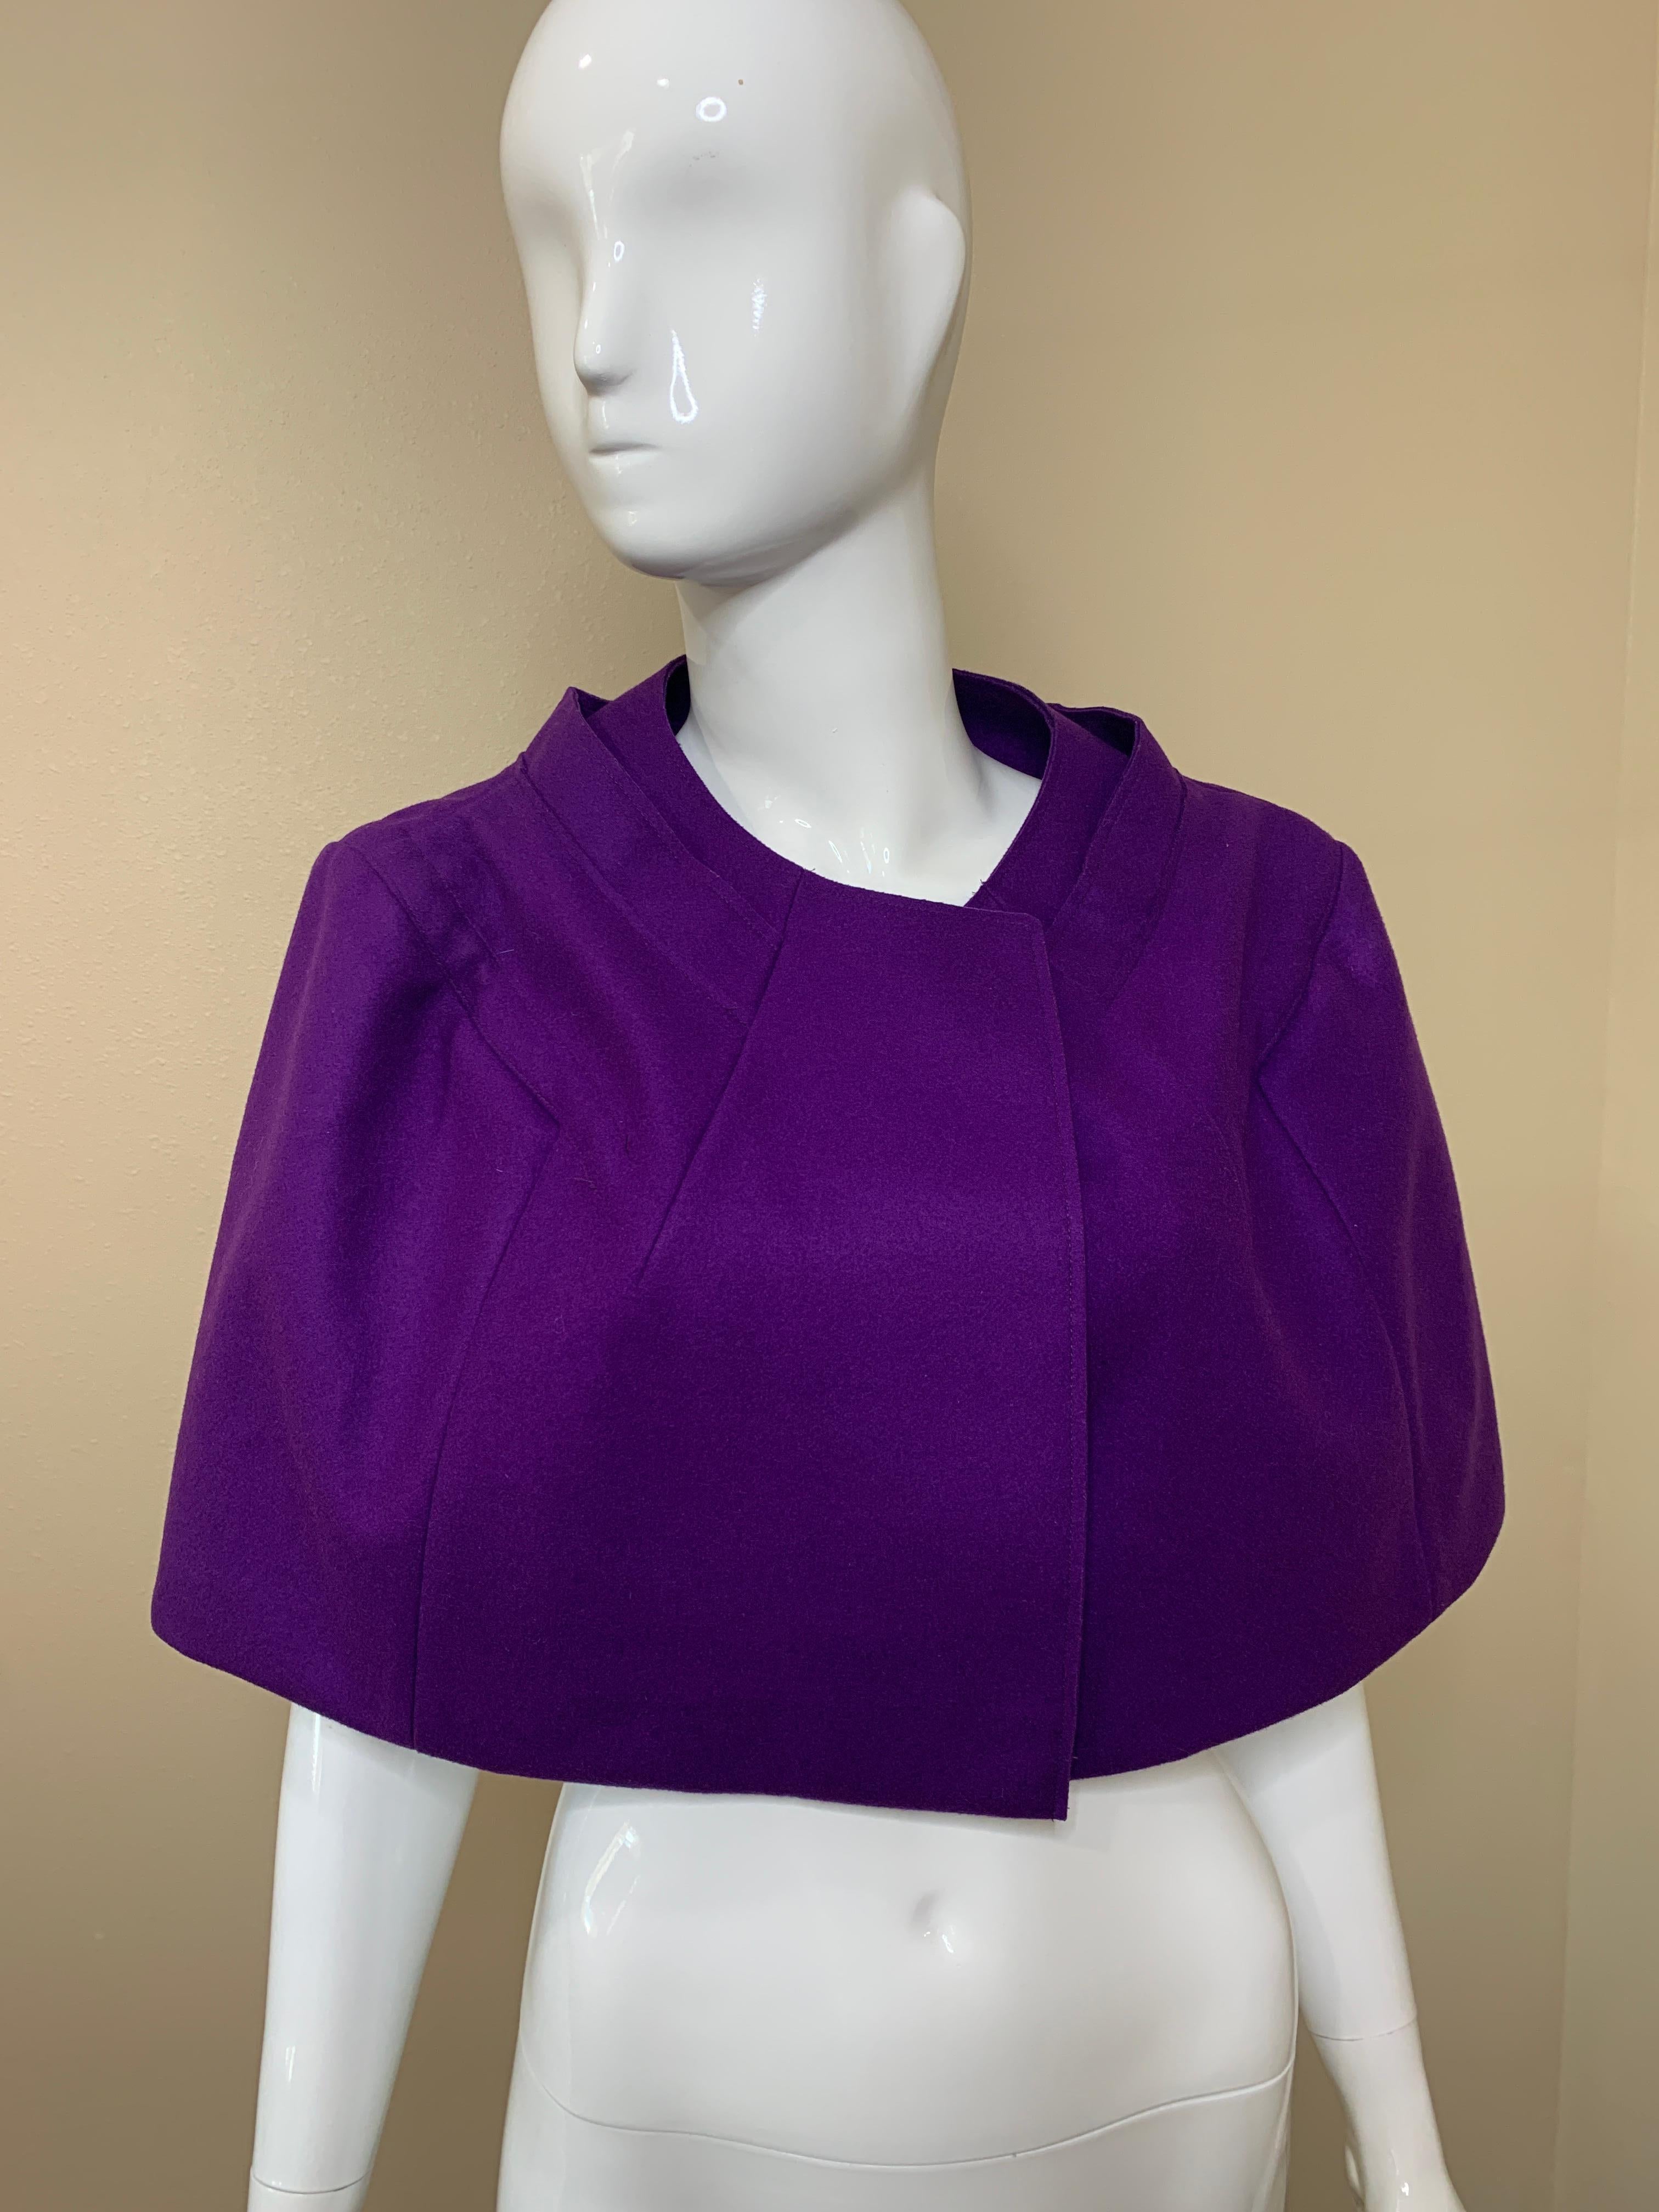 Super adorable and chic purple Marni cape. Never worn, with tags attached. 
Perfect over a dress or formal outfit out to add to the outfit, or keep your shoulders warm. 
Has a nice tie on the interior to keep it from slipping on and off 

Made of